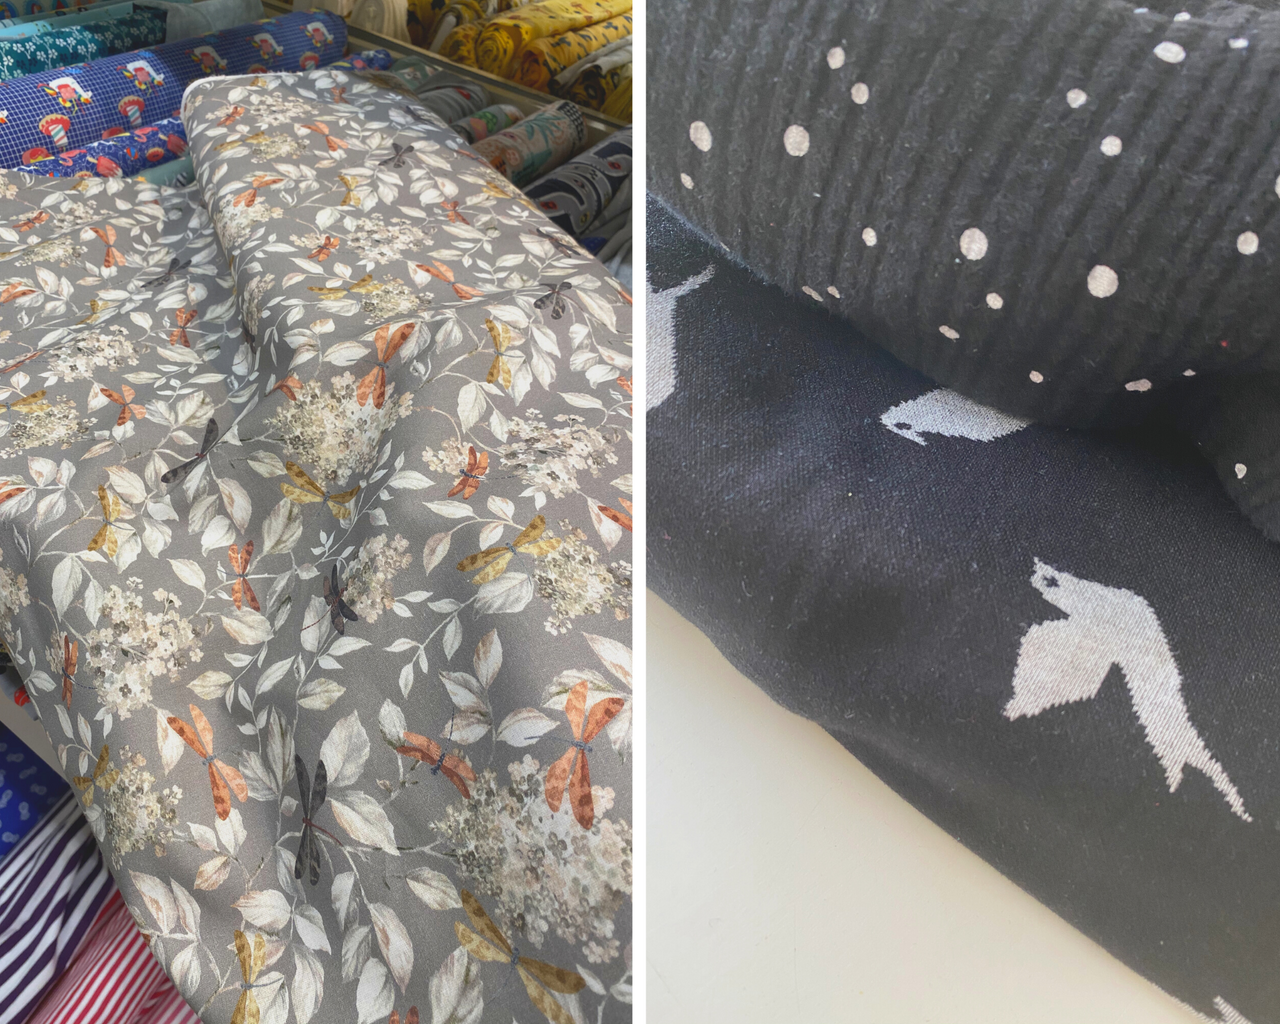 three different fabrics for sewing. One in a light grey with white leaves and butterflies, one in black with white dots and the third black with white birds.